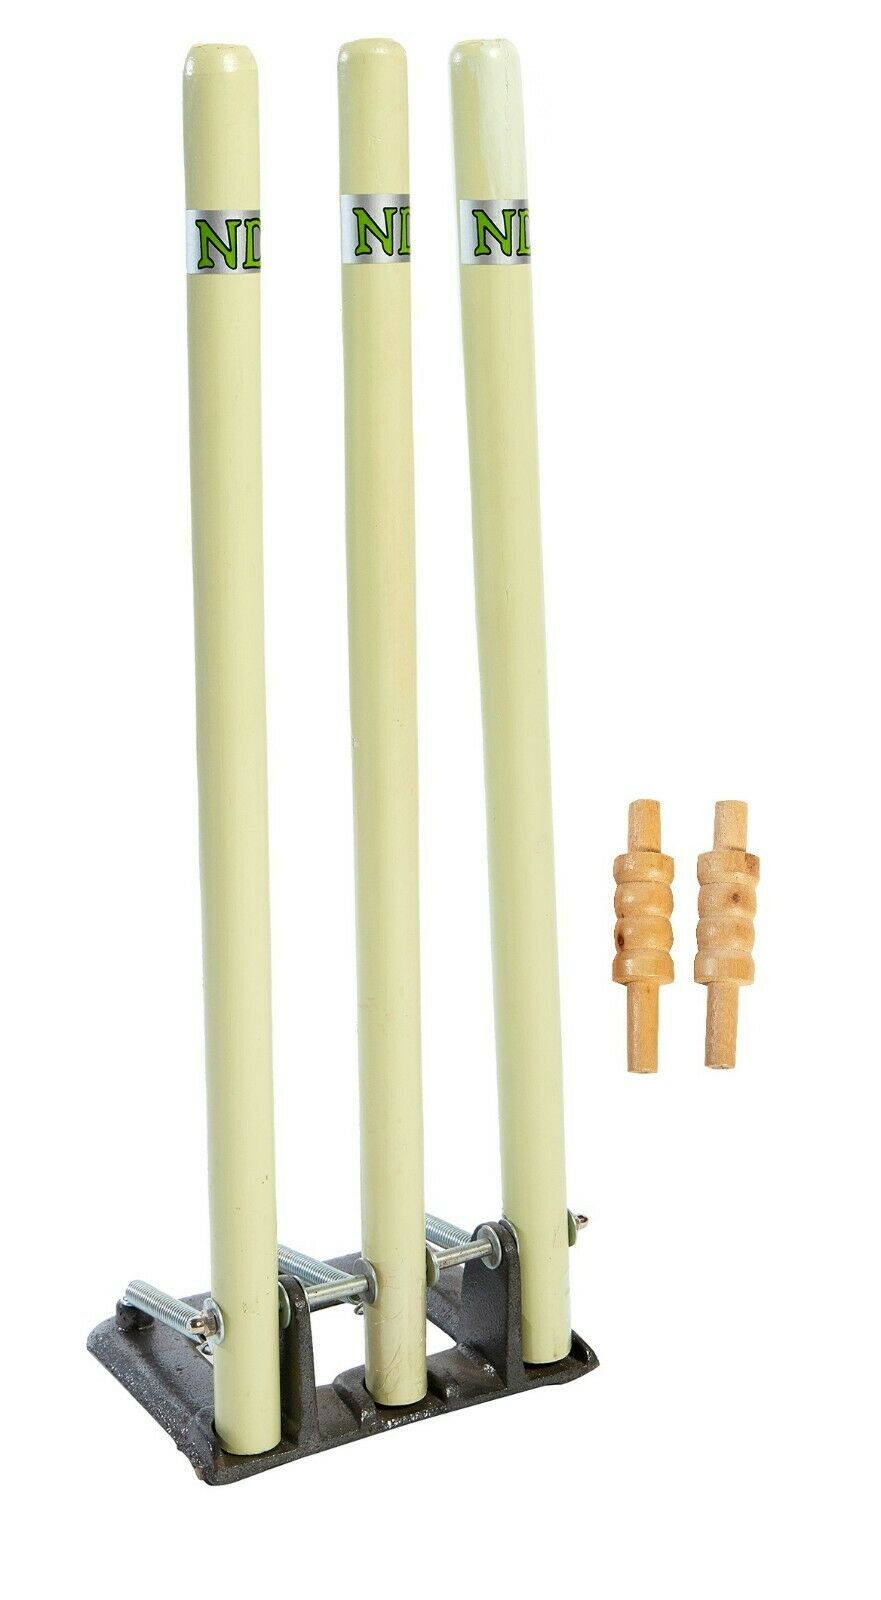 ND Cricket Wooden Spring Return Stumps Metal Base Wickets With Bails